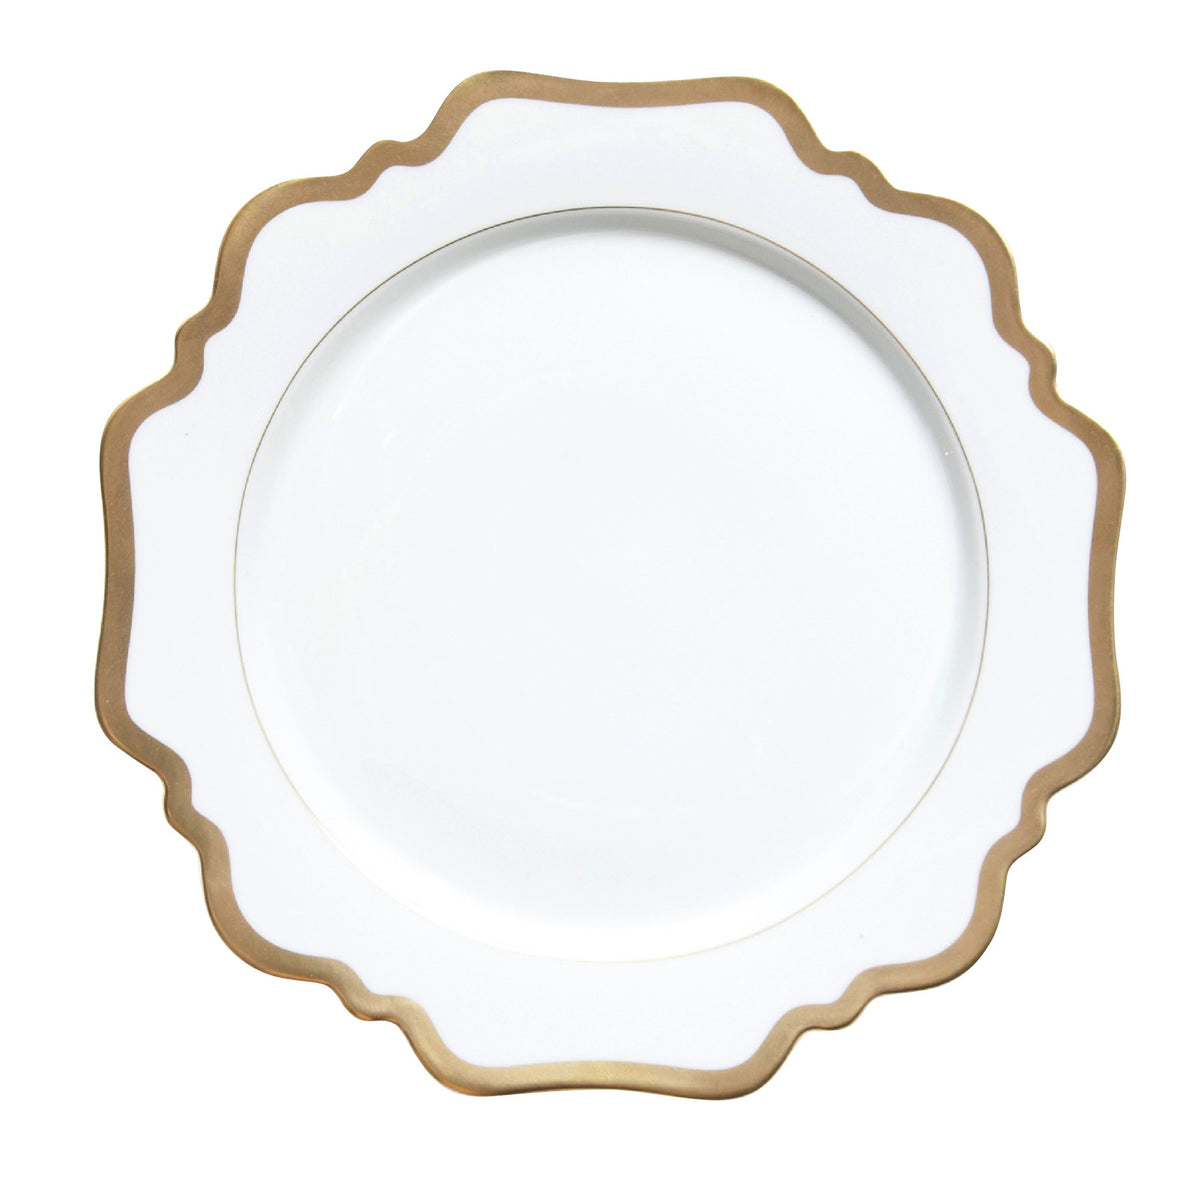 Antique White and Gold Dessert Plate